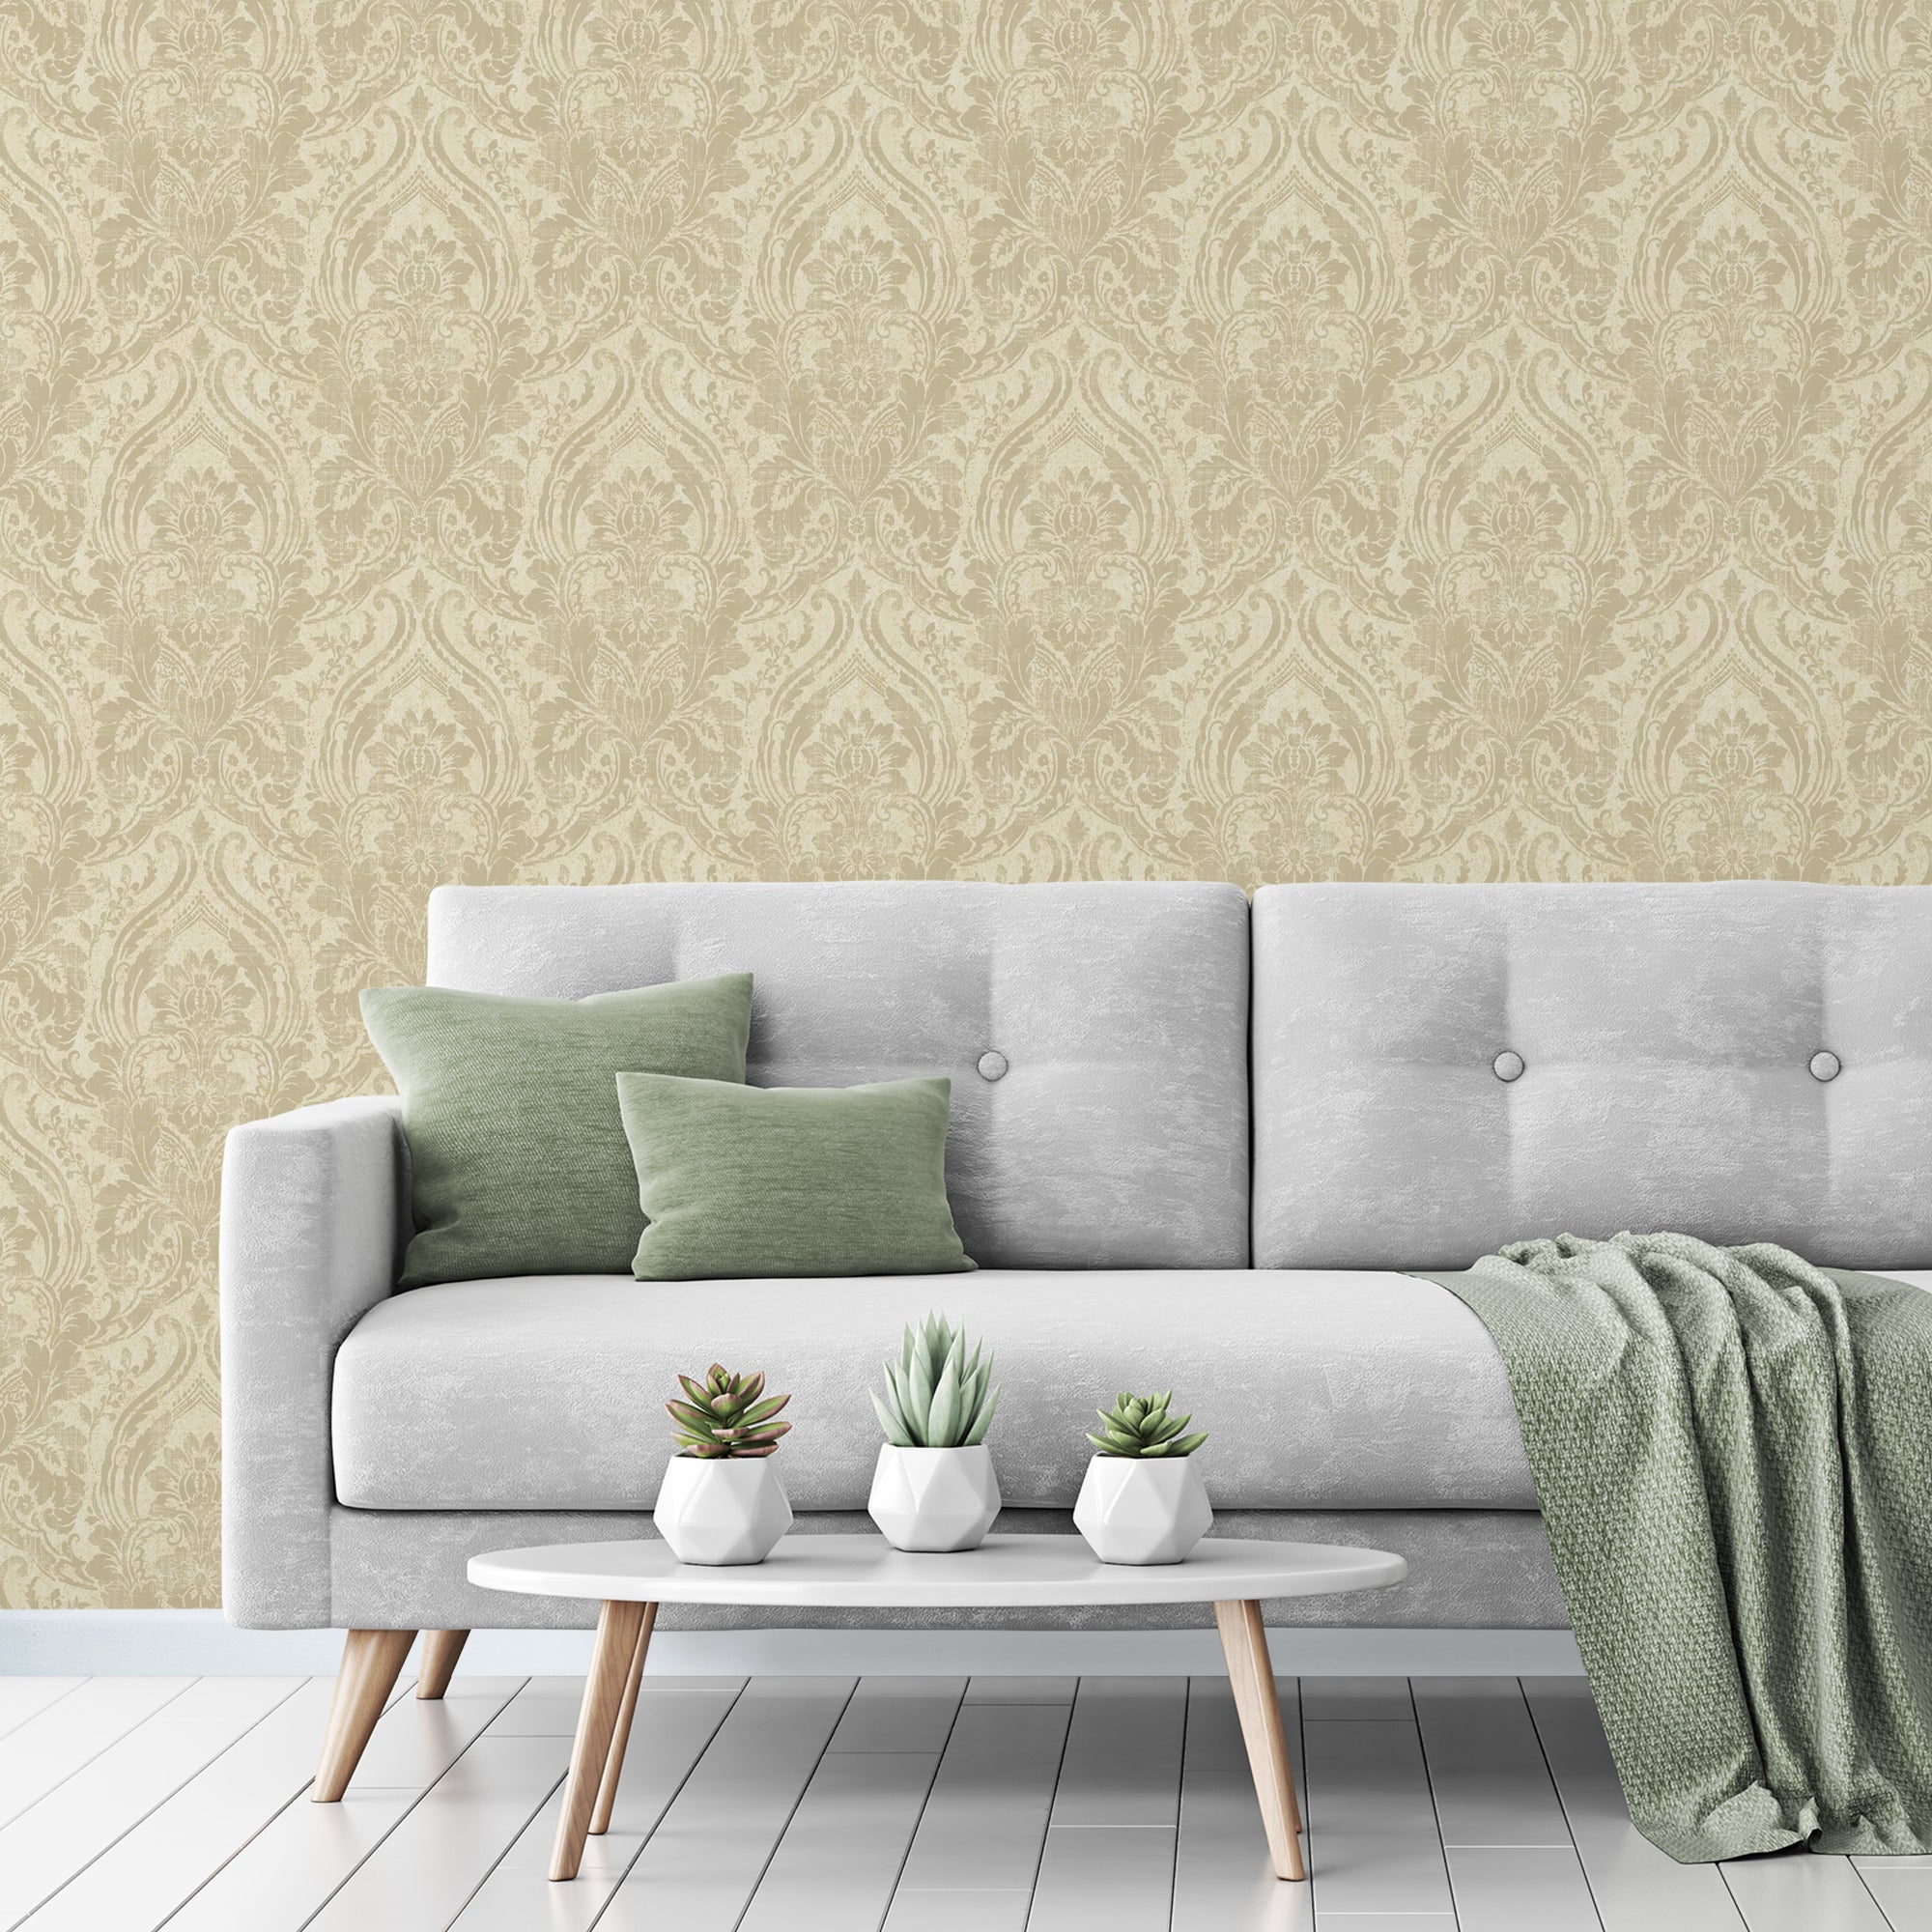 Textured Damask Cream and Gold Wallpaper | Grandeco | A68703